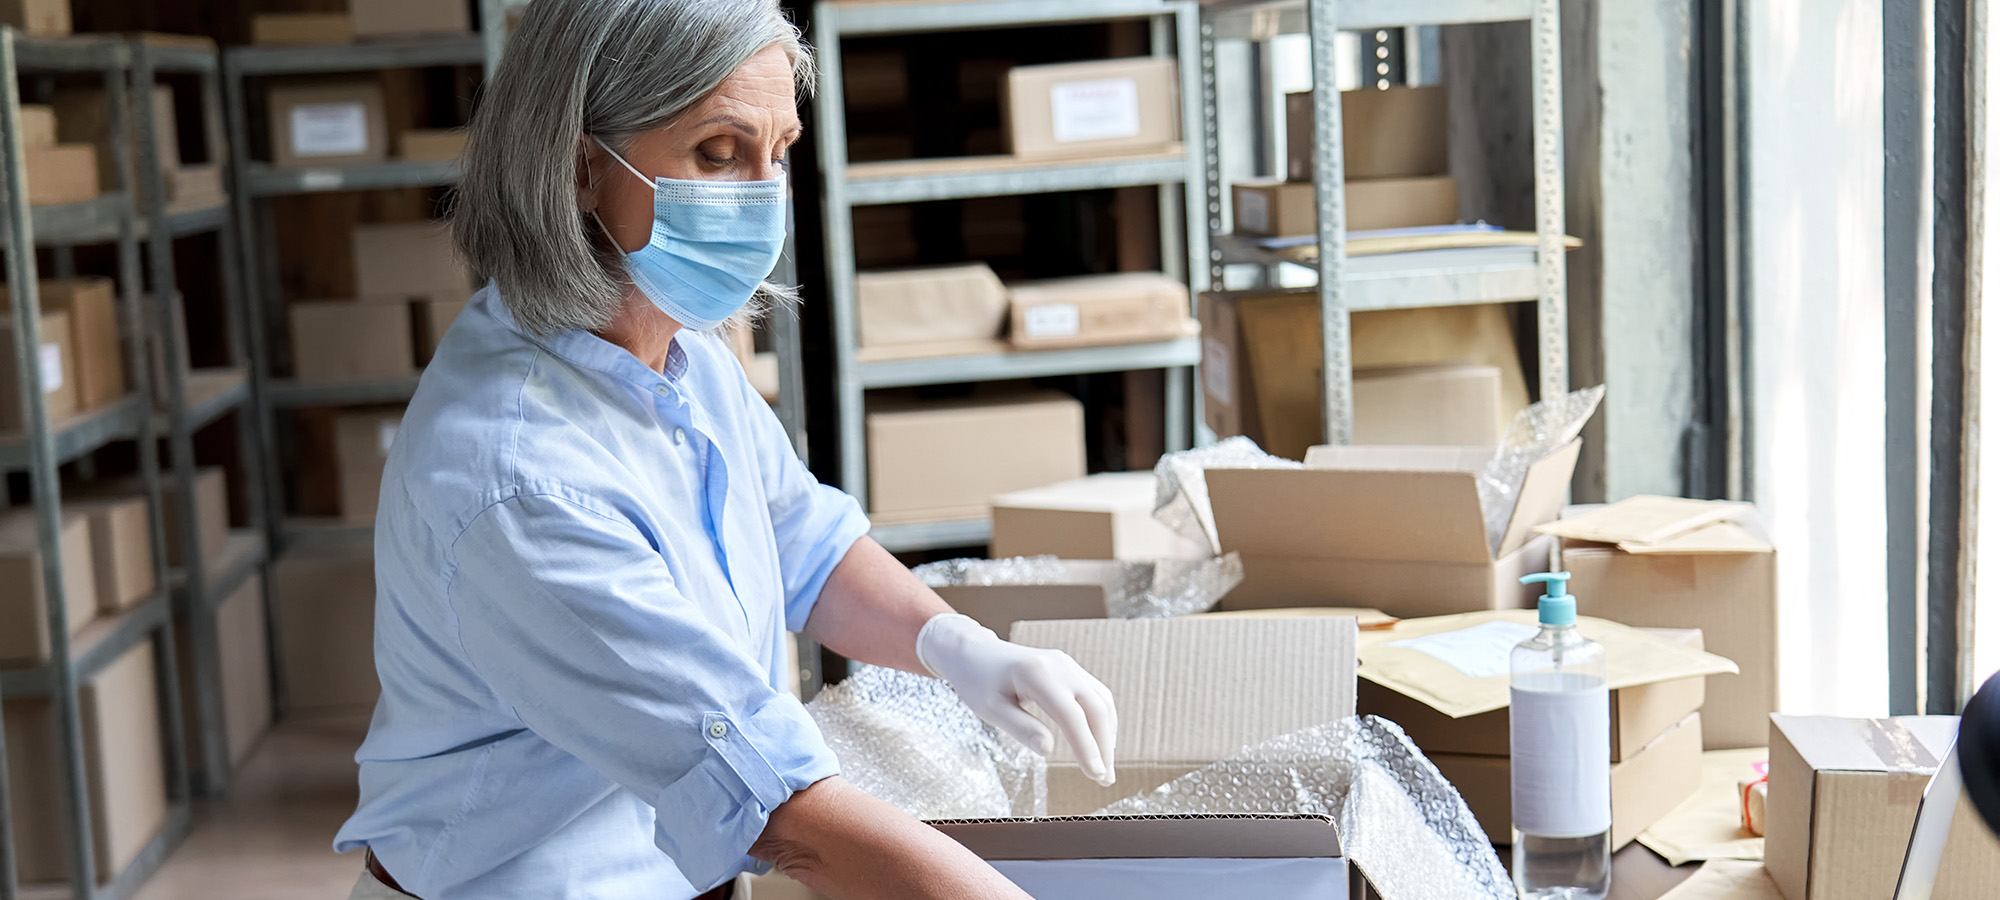 Mature female volunteer warehouse worker wearing face mask working in shipping delivery charitable stock organization packing medical donations box. Covid 19 coronavirus donating and volunteering.